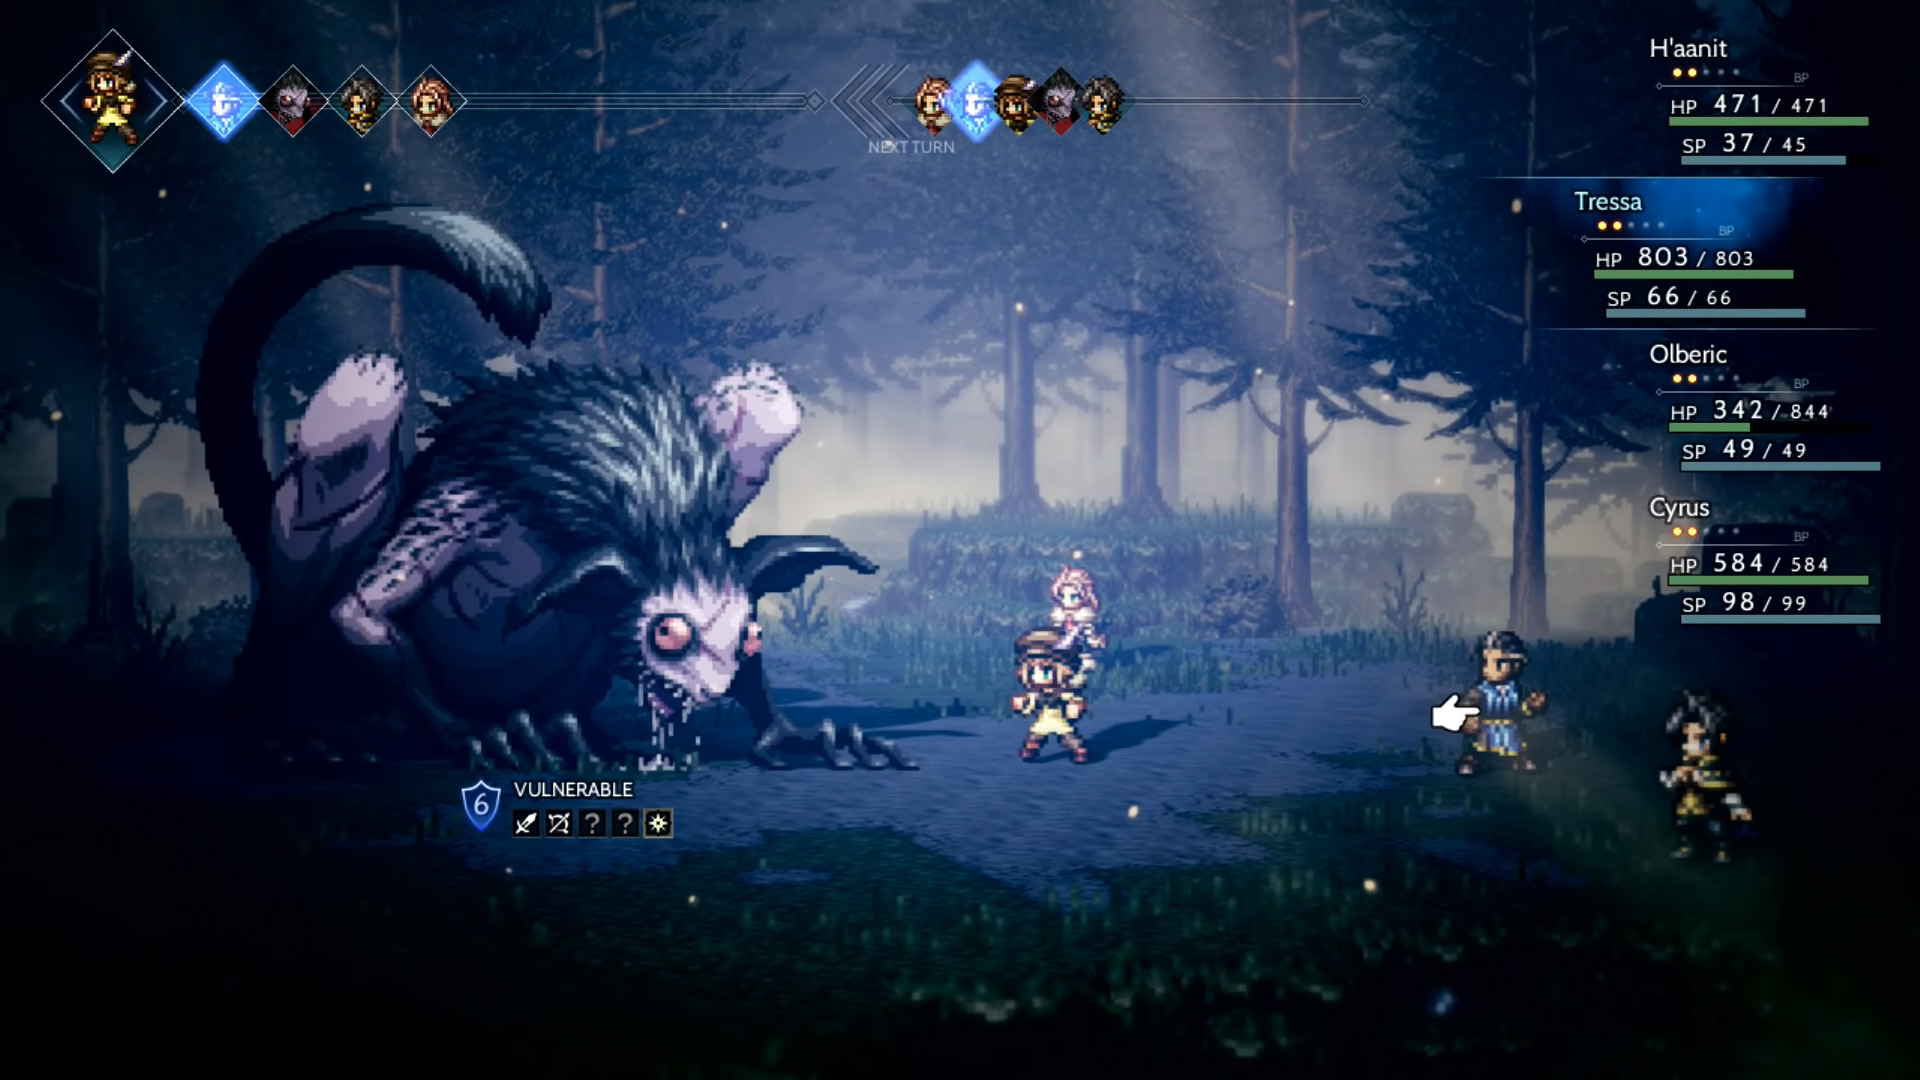 free download octopath 2